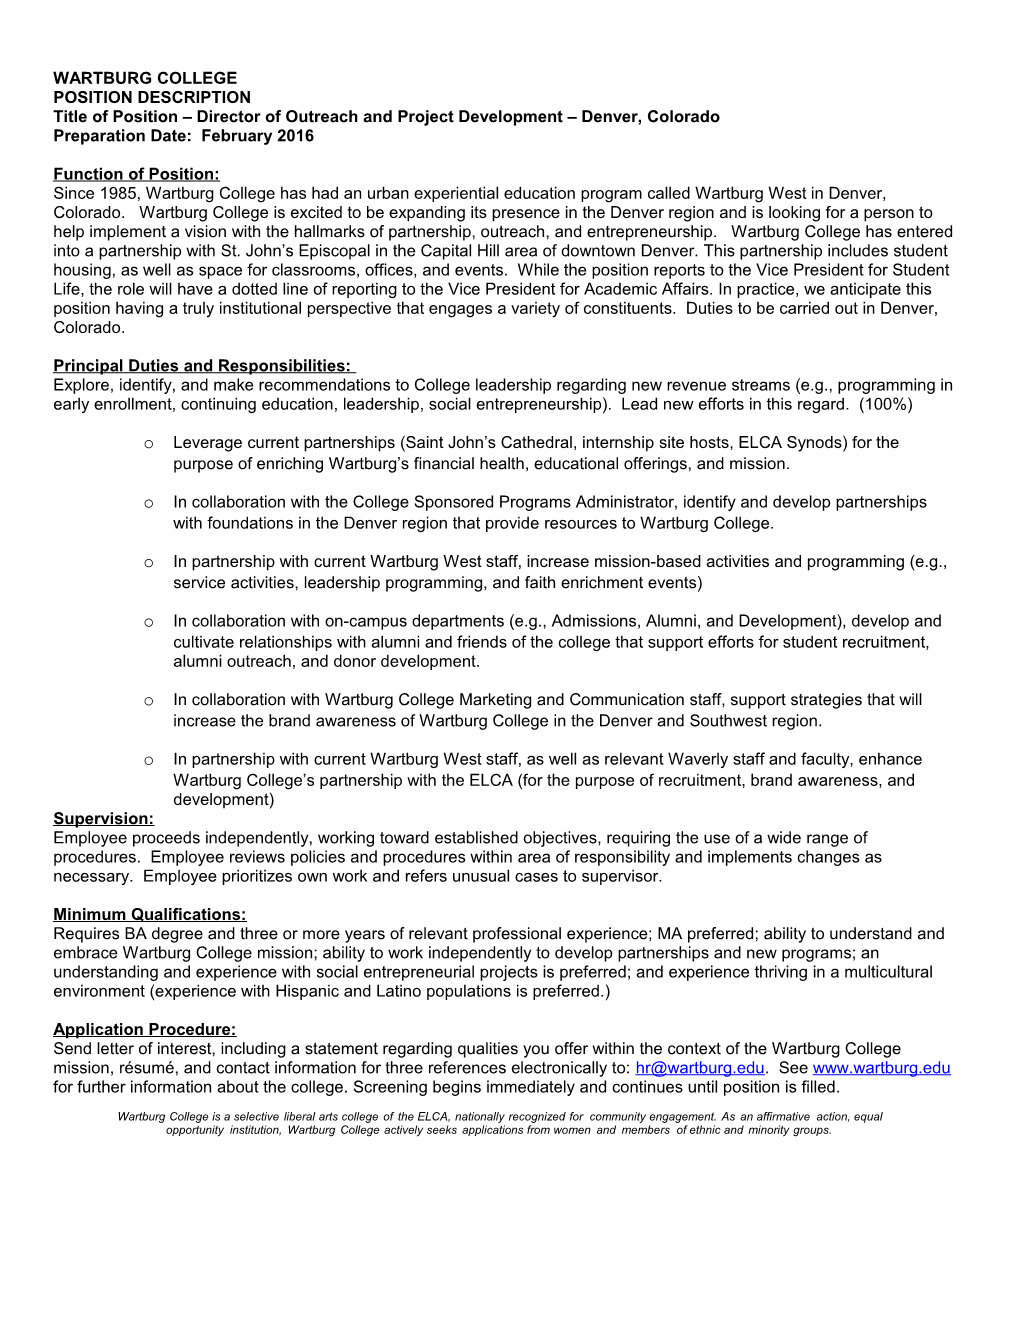 Title of Position Director of Outreach and Project Development Denver, Colorado